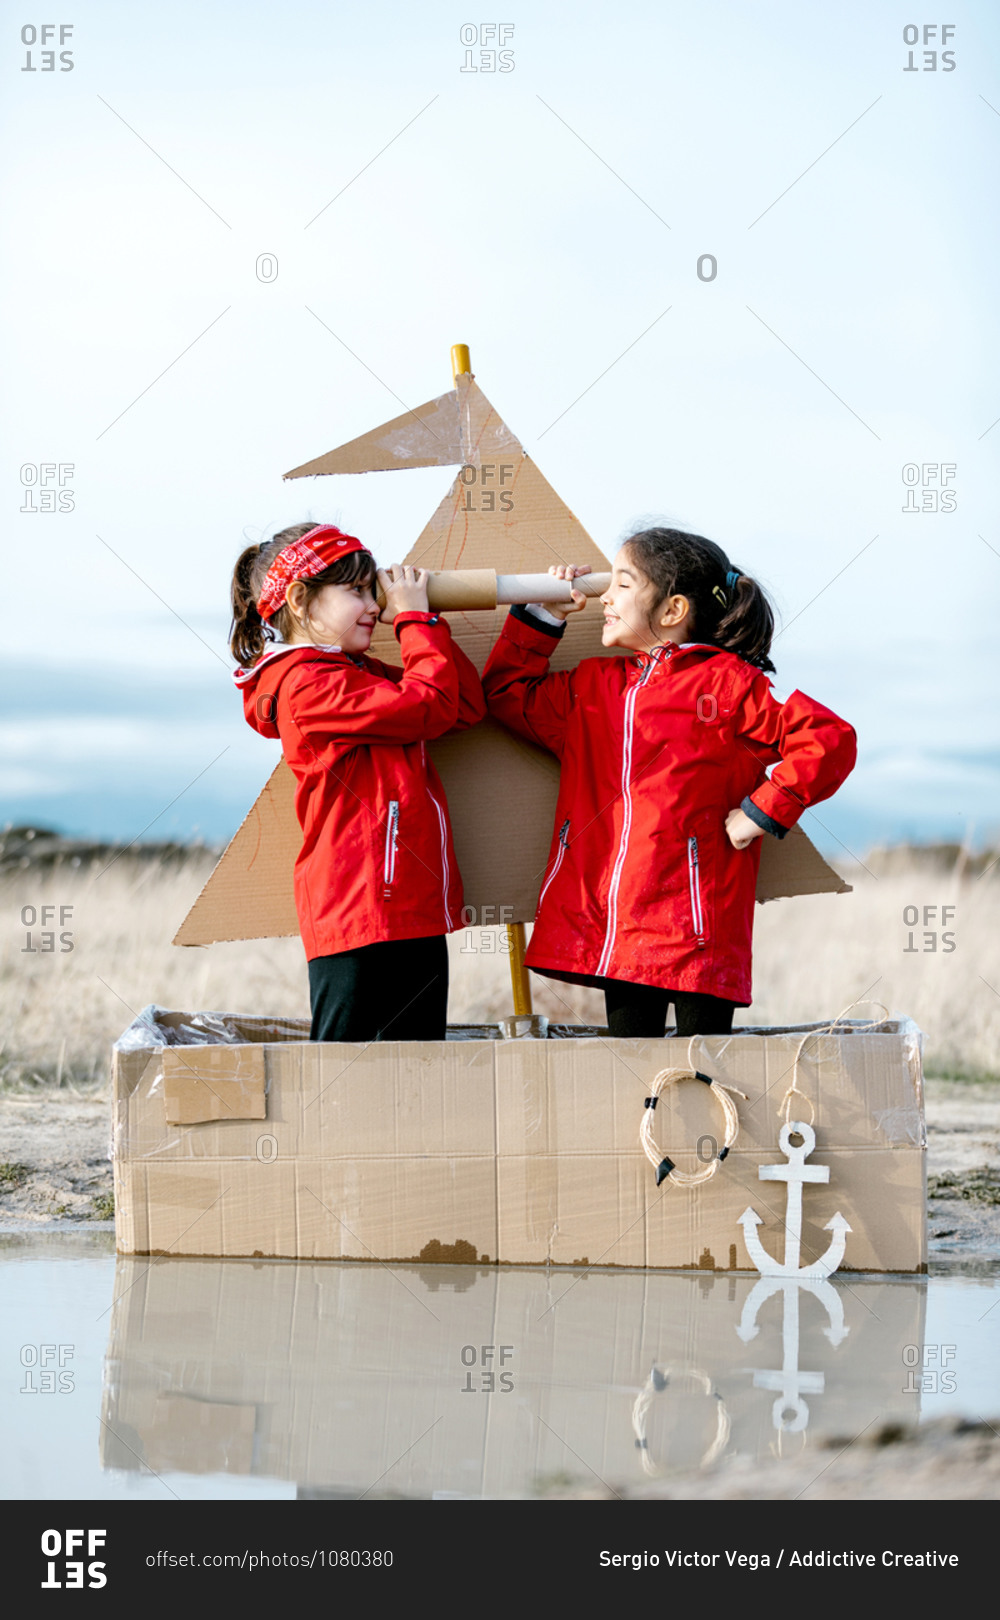 Side view of cheerful kids with handmade spyglass standing in handmade cardboard boat and playing